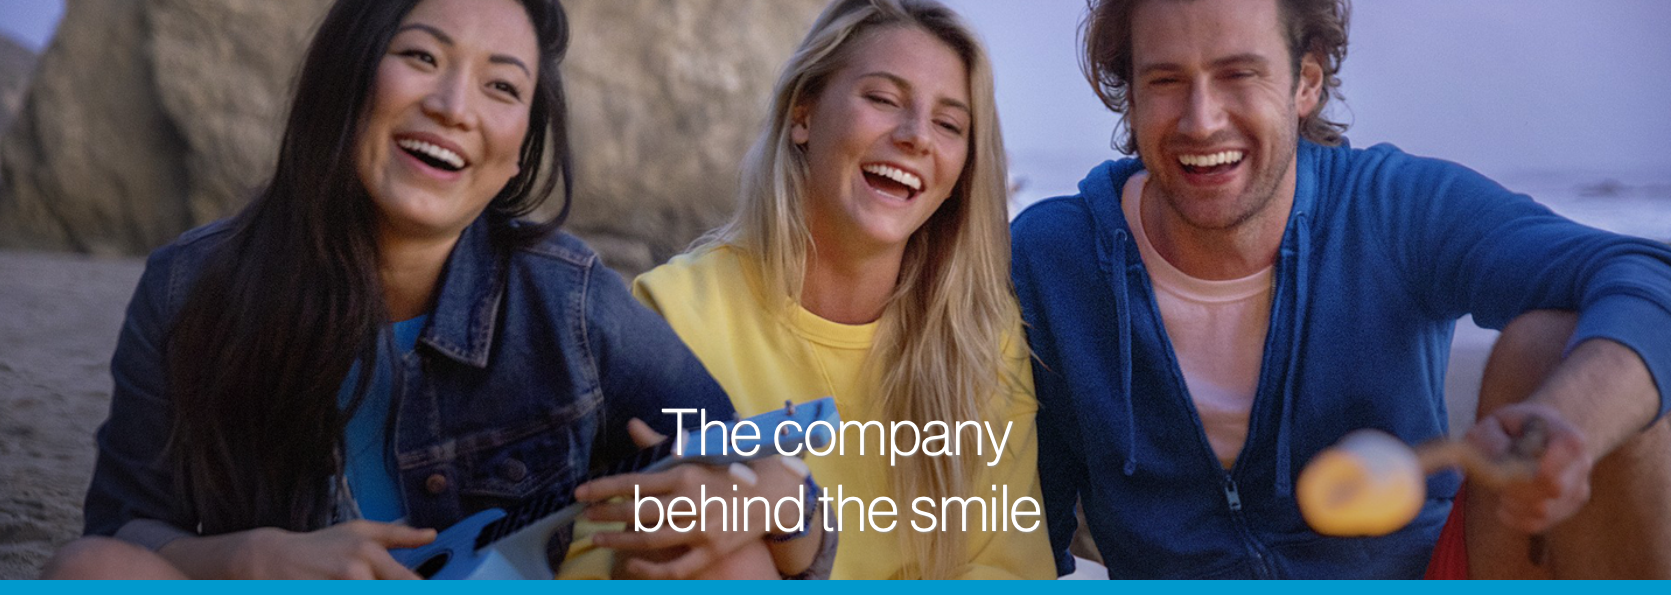 Align Technology - The Company Behind the Smile 